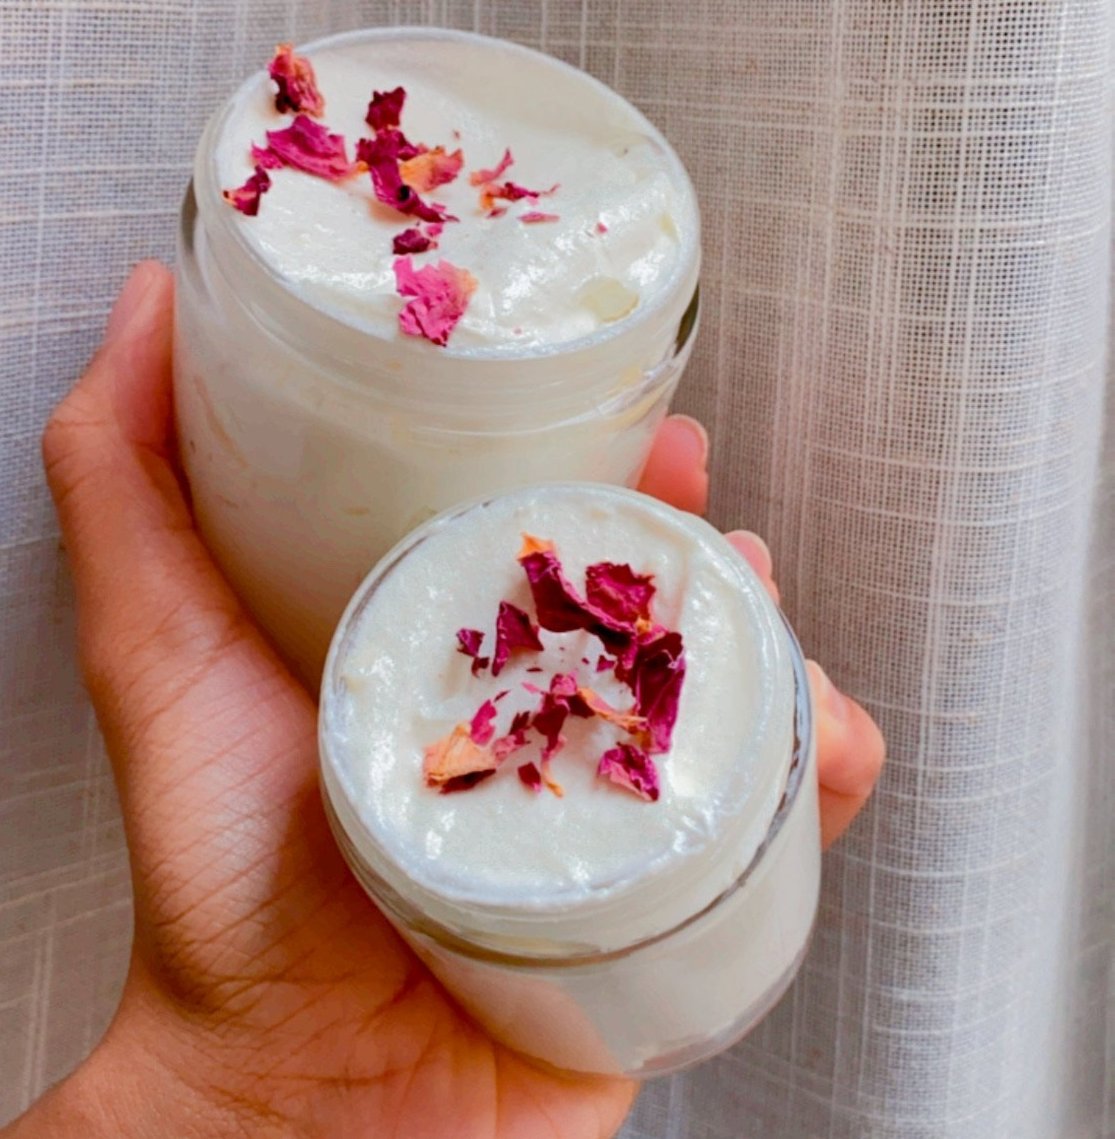 "Whipped Rose" Herbal Infused Body Butter